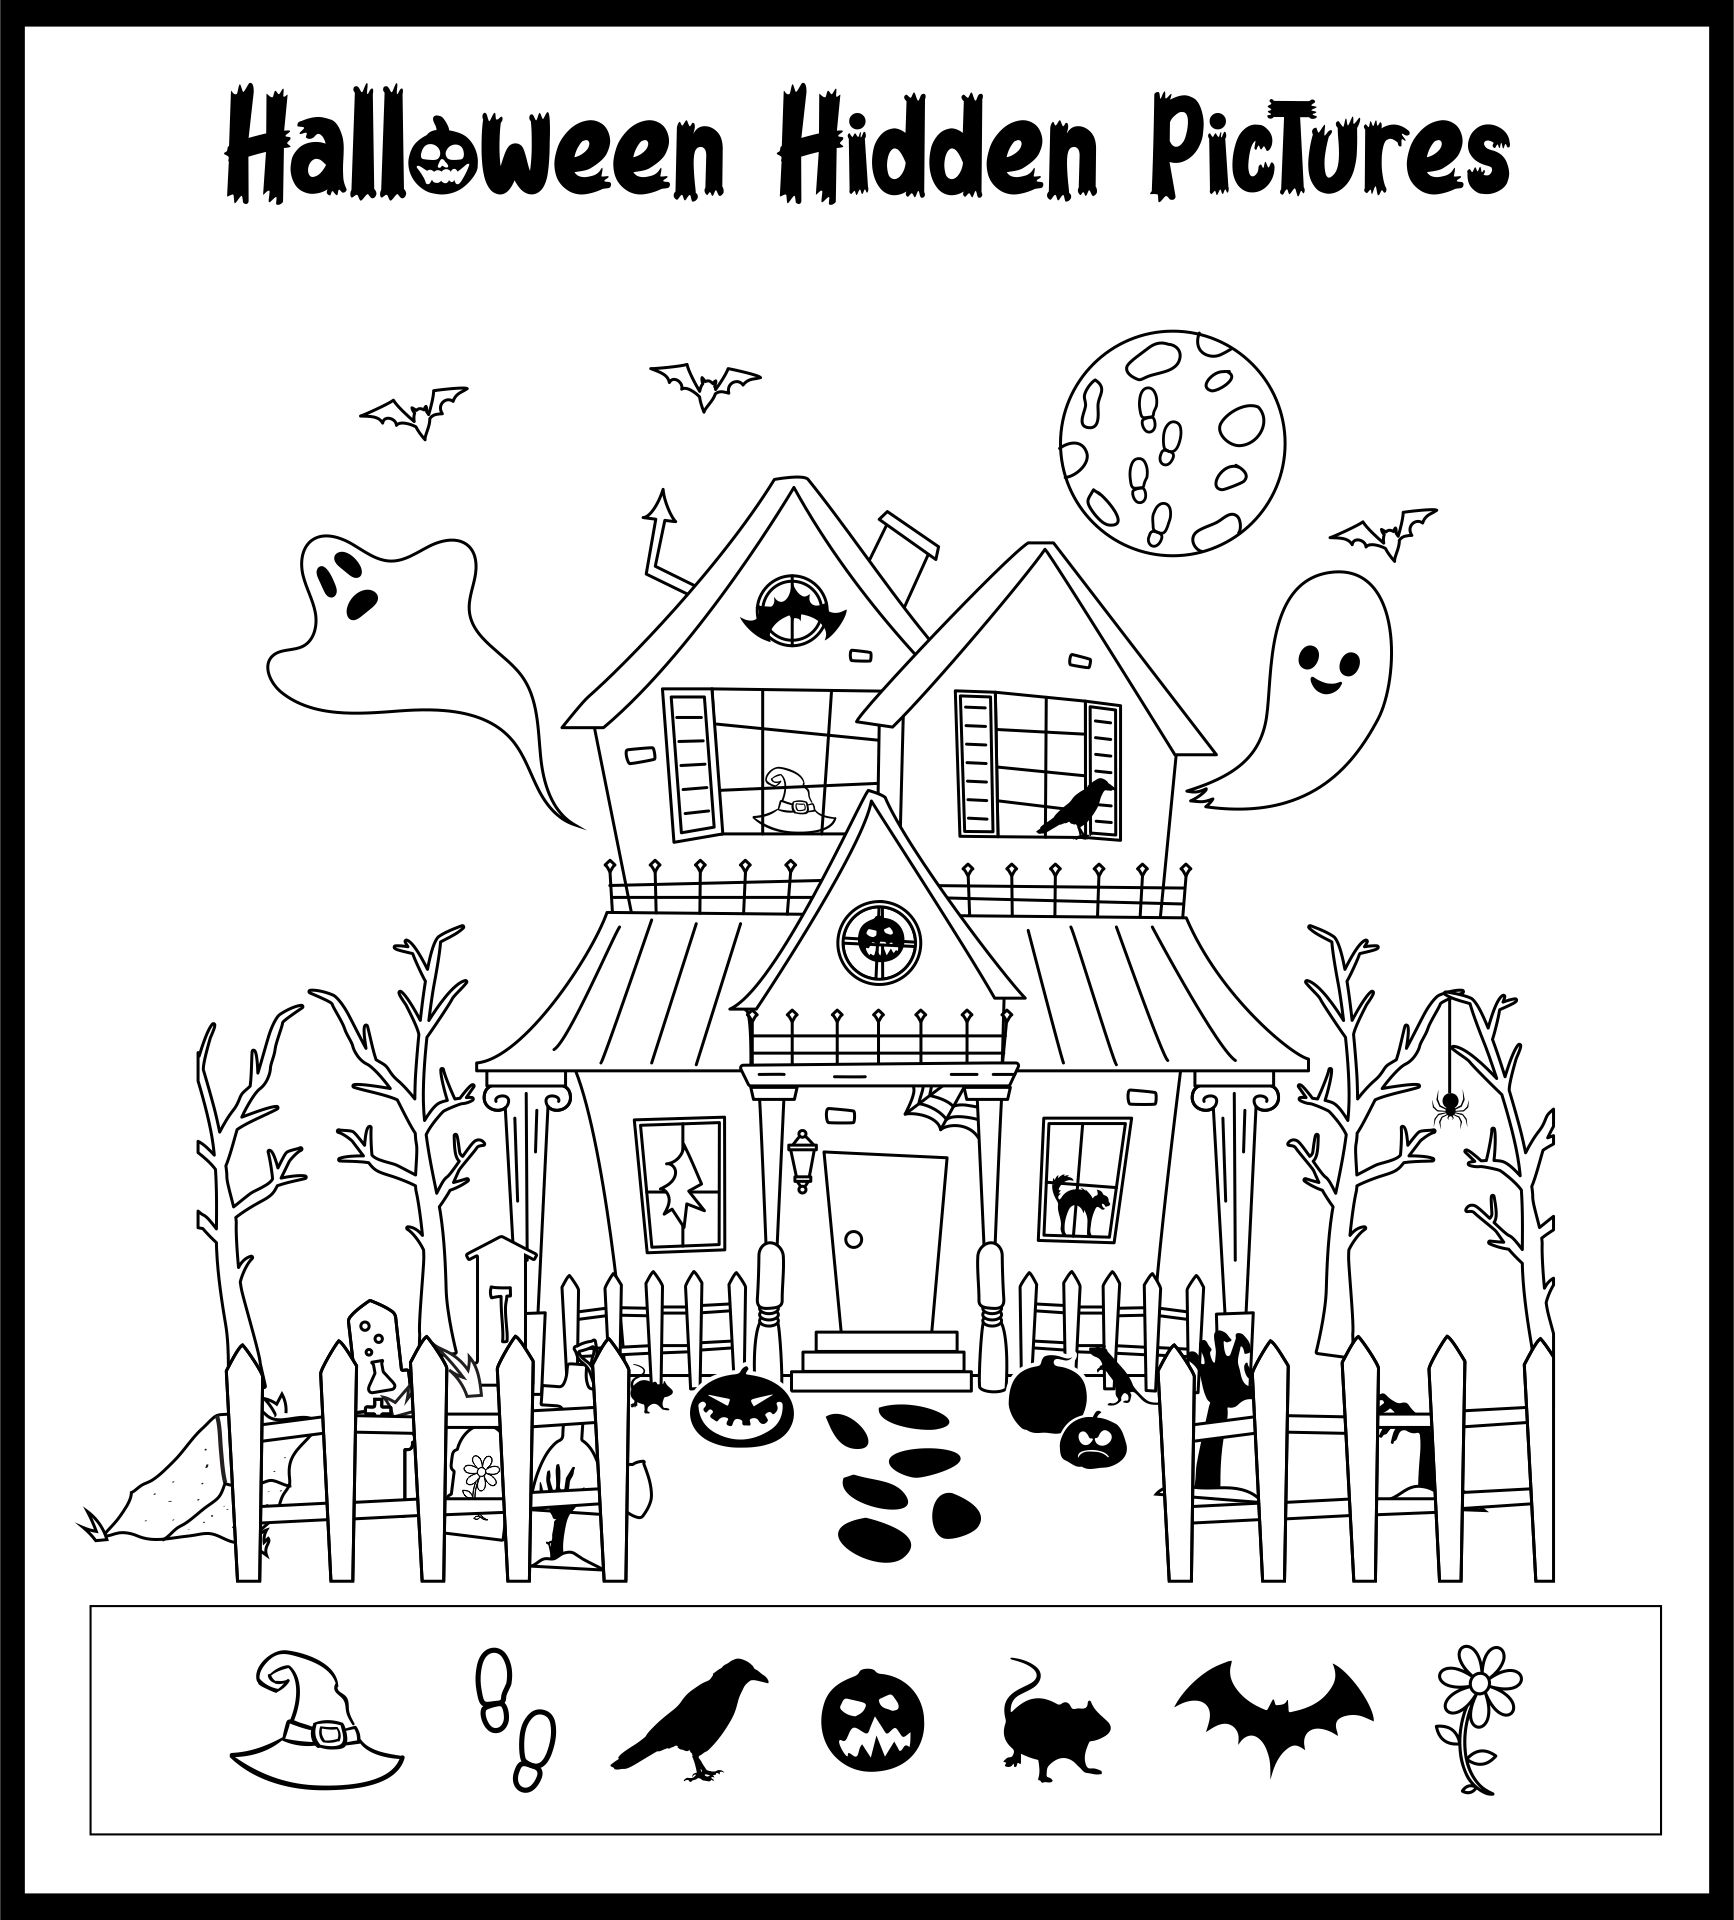 15-best-halloween-hidden-picture-printable-pdf-for-free-at-printablee